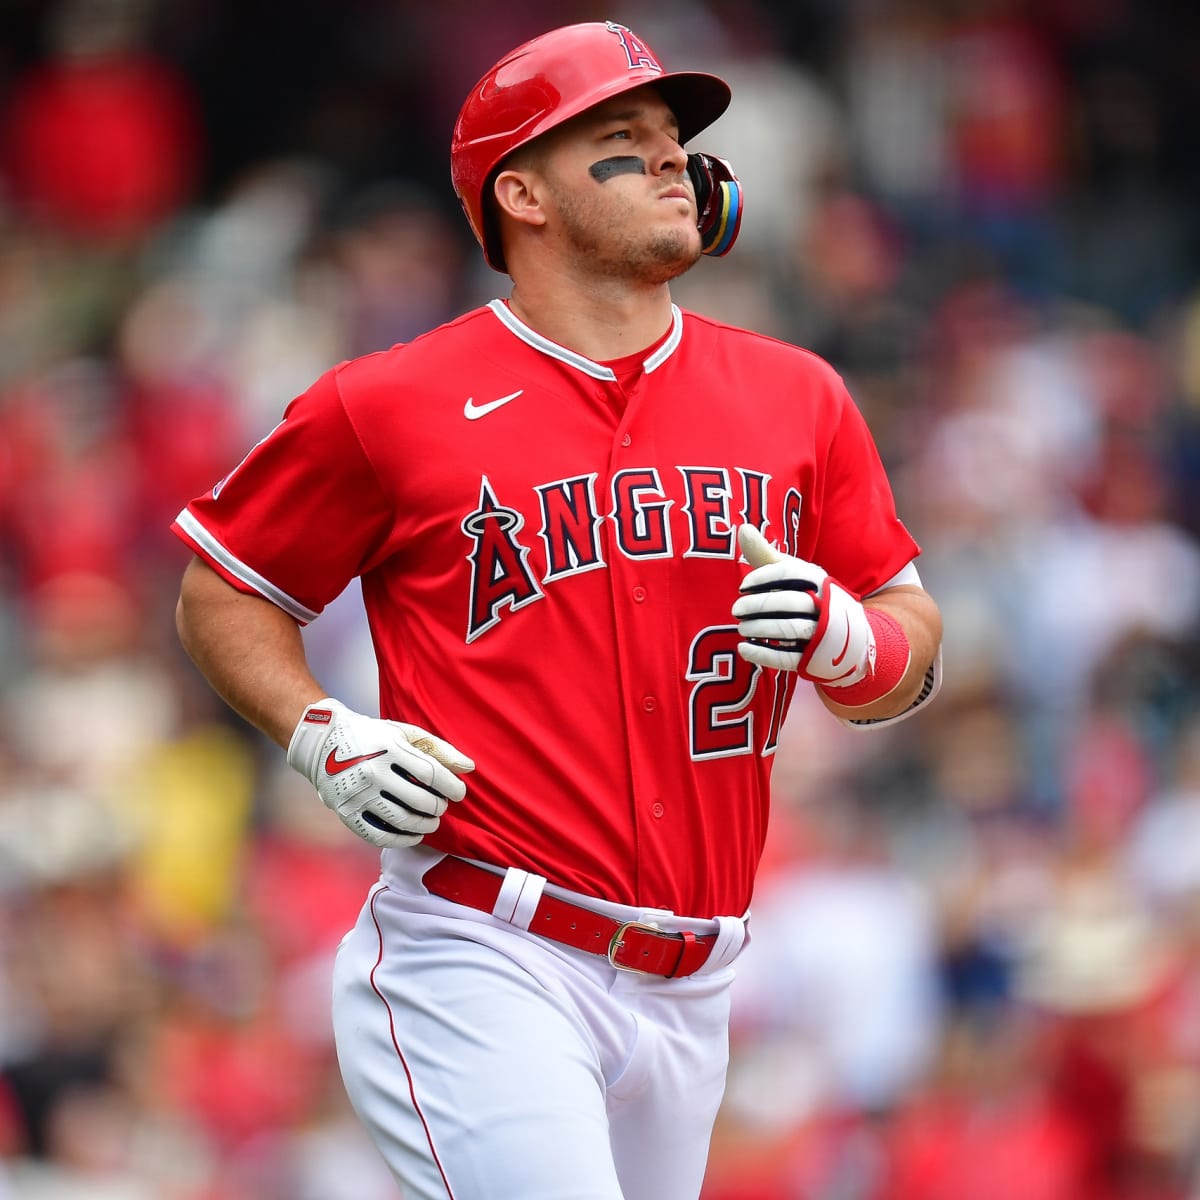 Mike Trout Doesn't Understand Why Angels Can't Compete with Top MLB Teams -  Los Angeles Angels